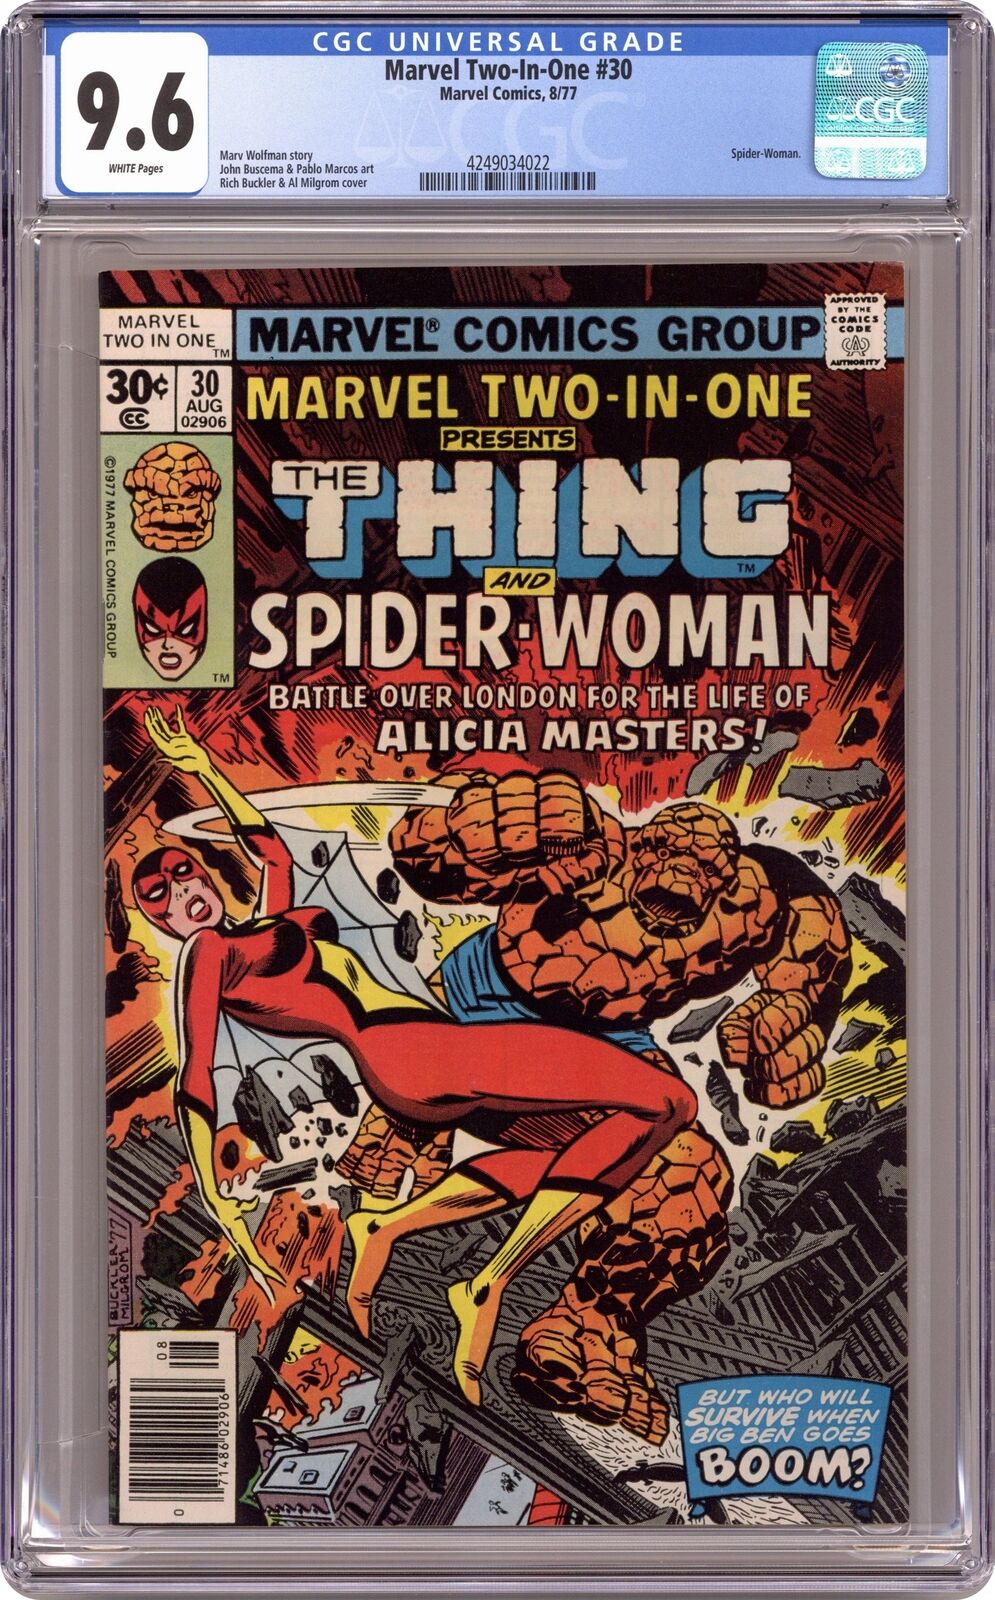 Marvel Two-in-One #30 CGC 9.6 1977 4249034022